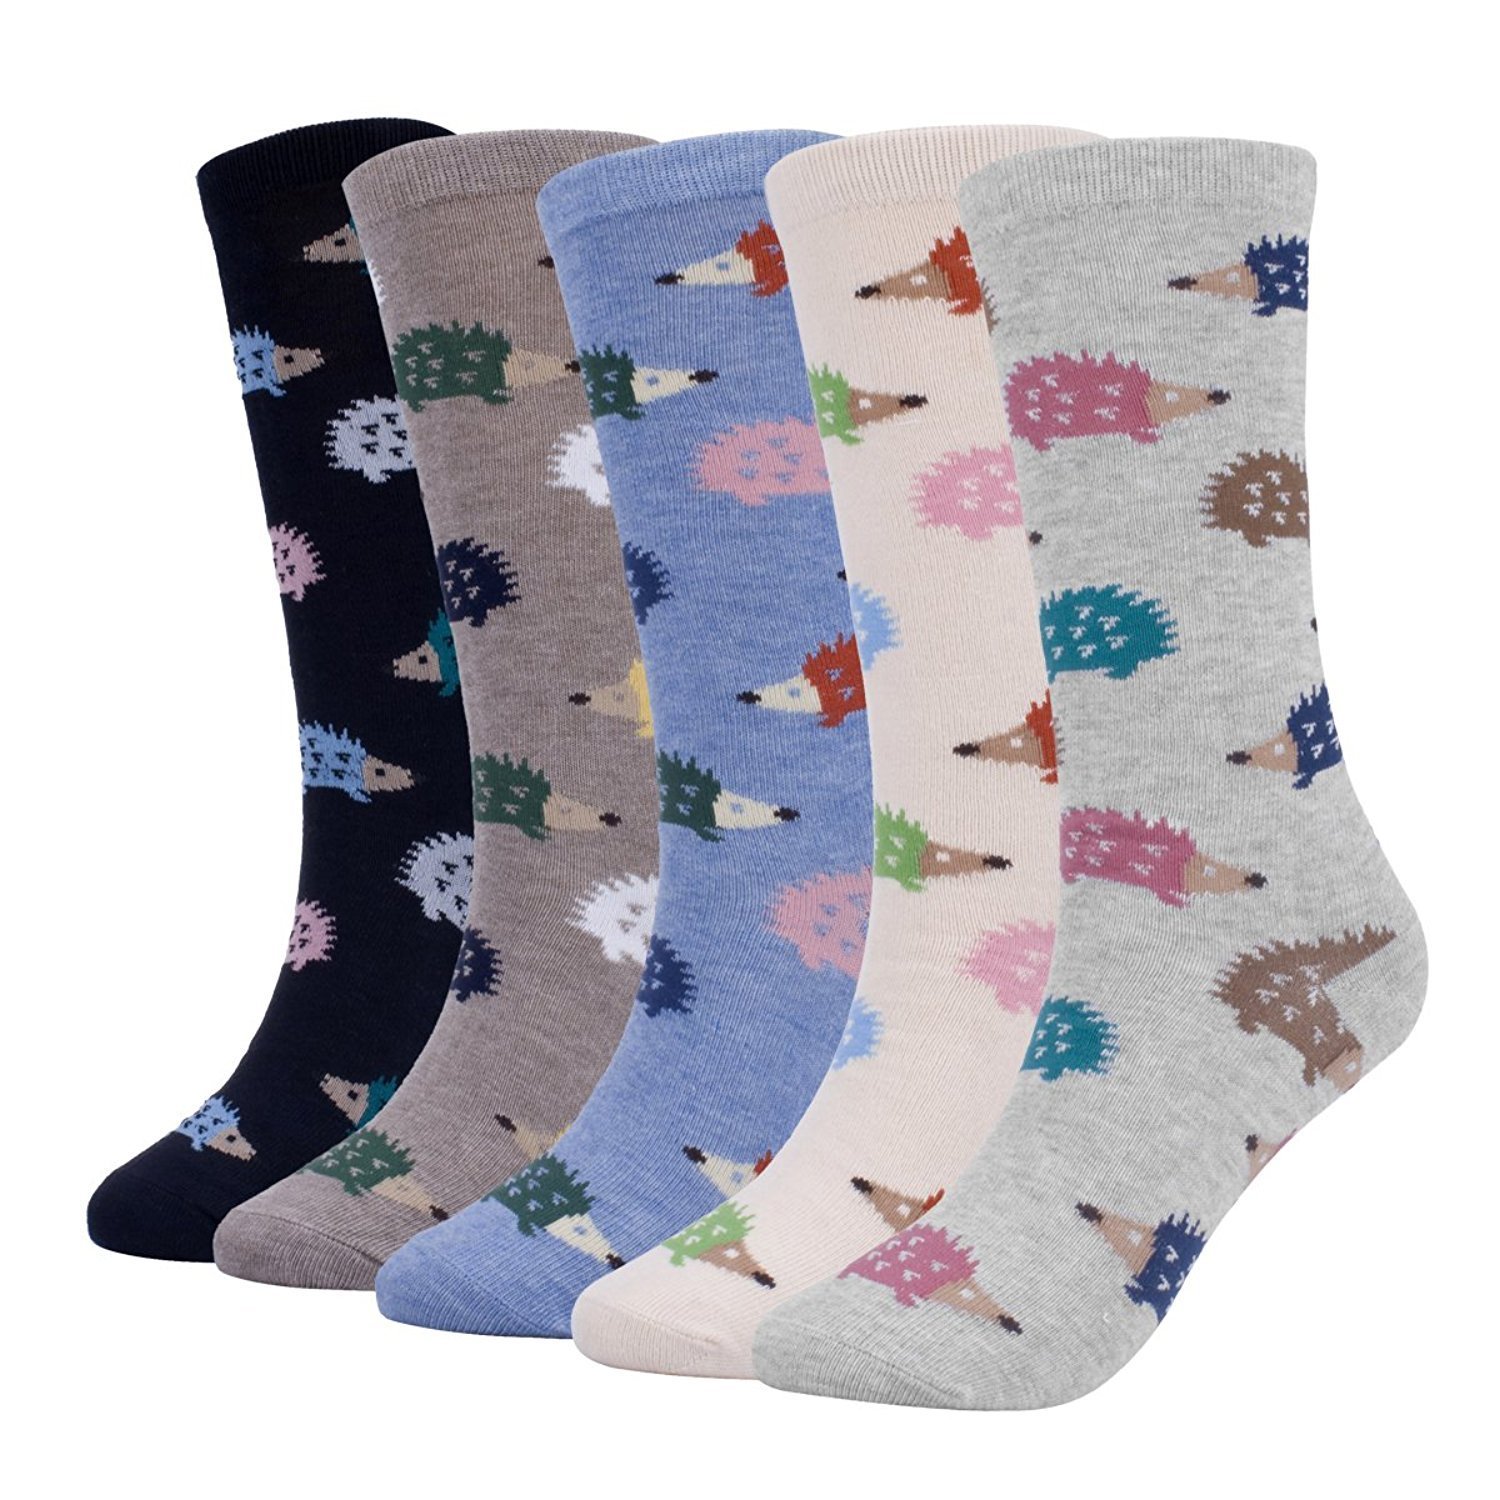 Book Cover Haley Clothes Hedgehog Pattern Socks Cotton Cute Colorful Animal Pattern Taller Crew Socks For Women (5 Pairs)